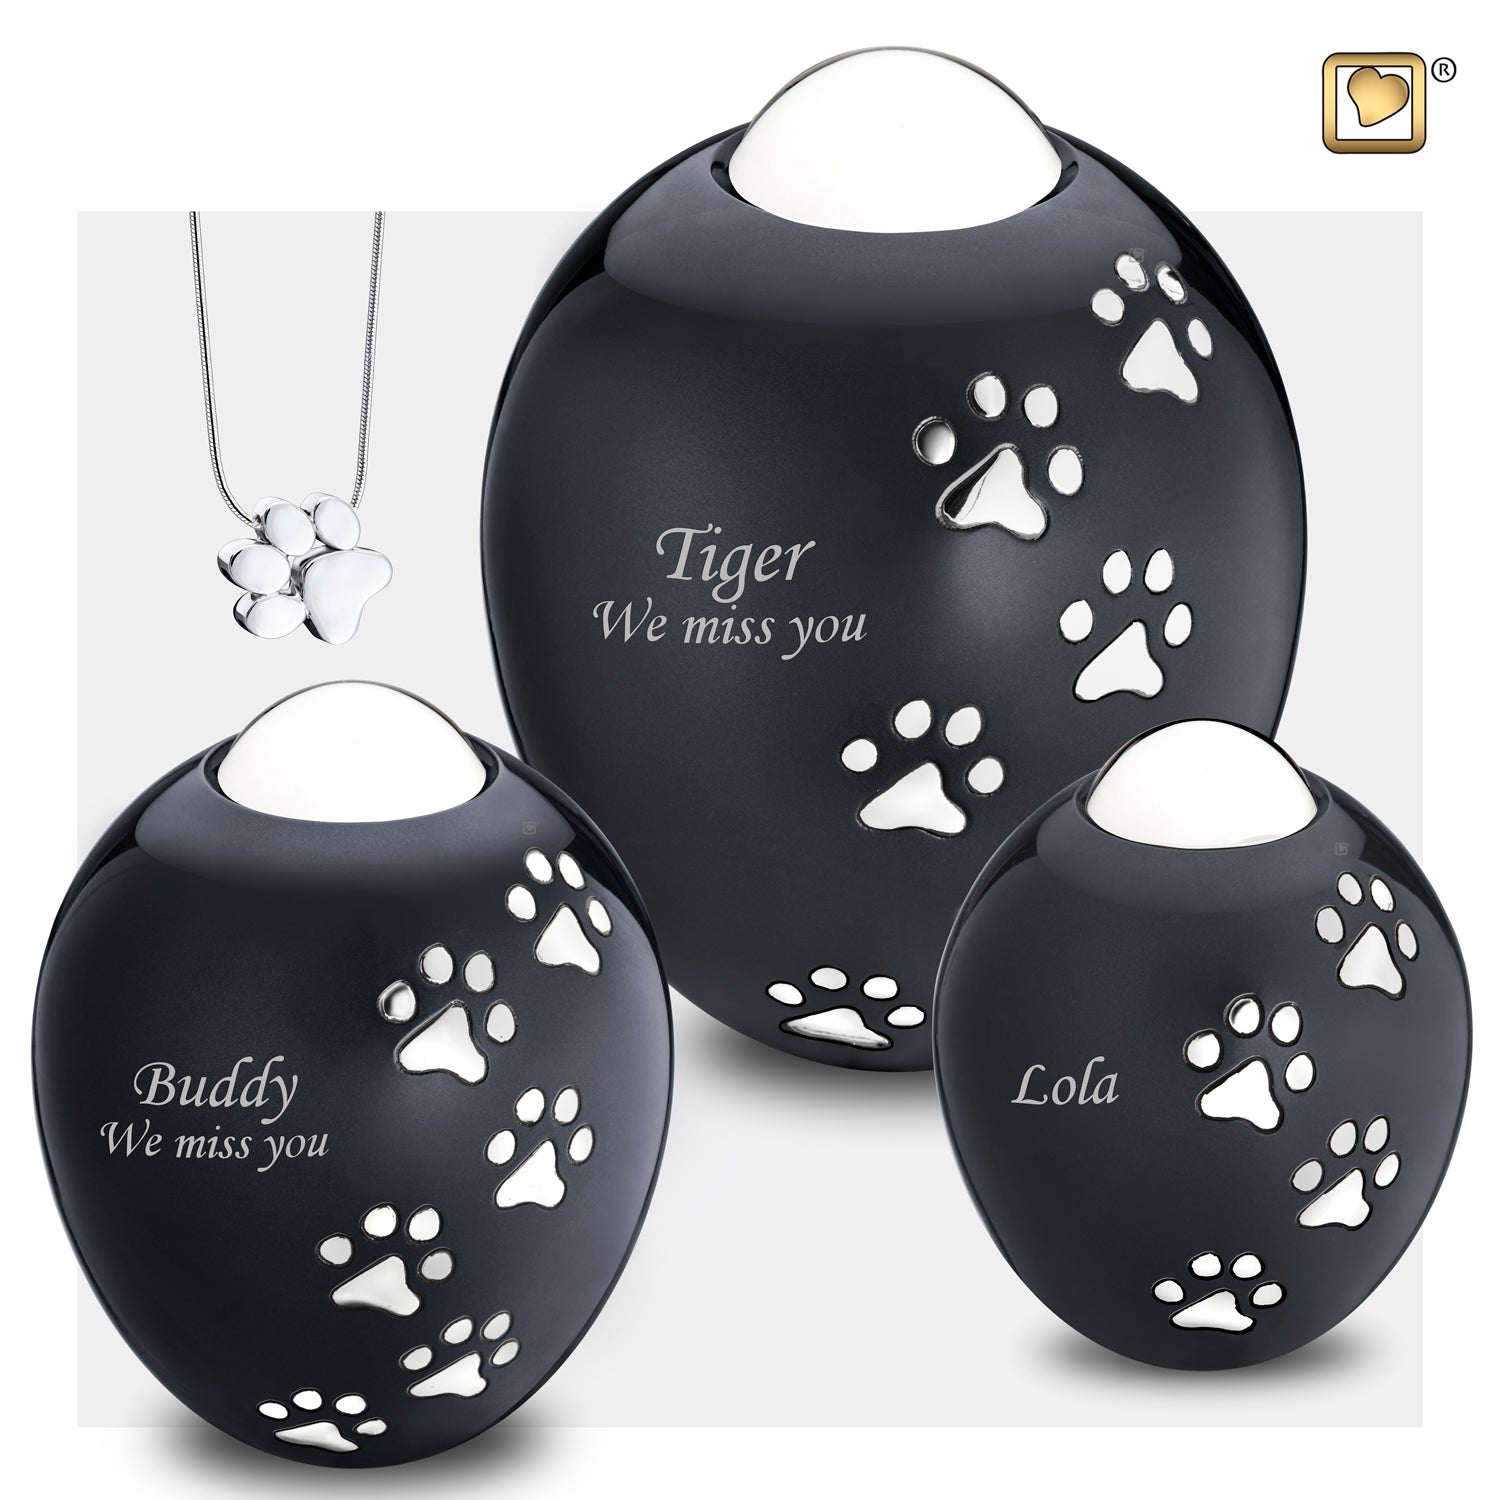 Adore™ Midnight Black Colored Paw Printed Oval Shaped Medium Pet Cremation Urn